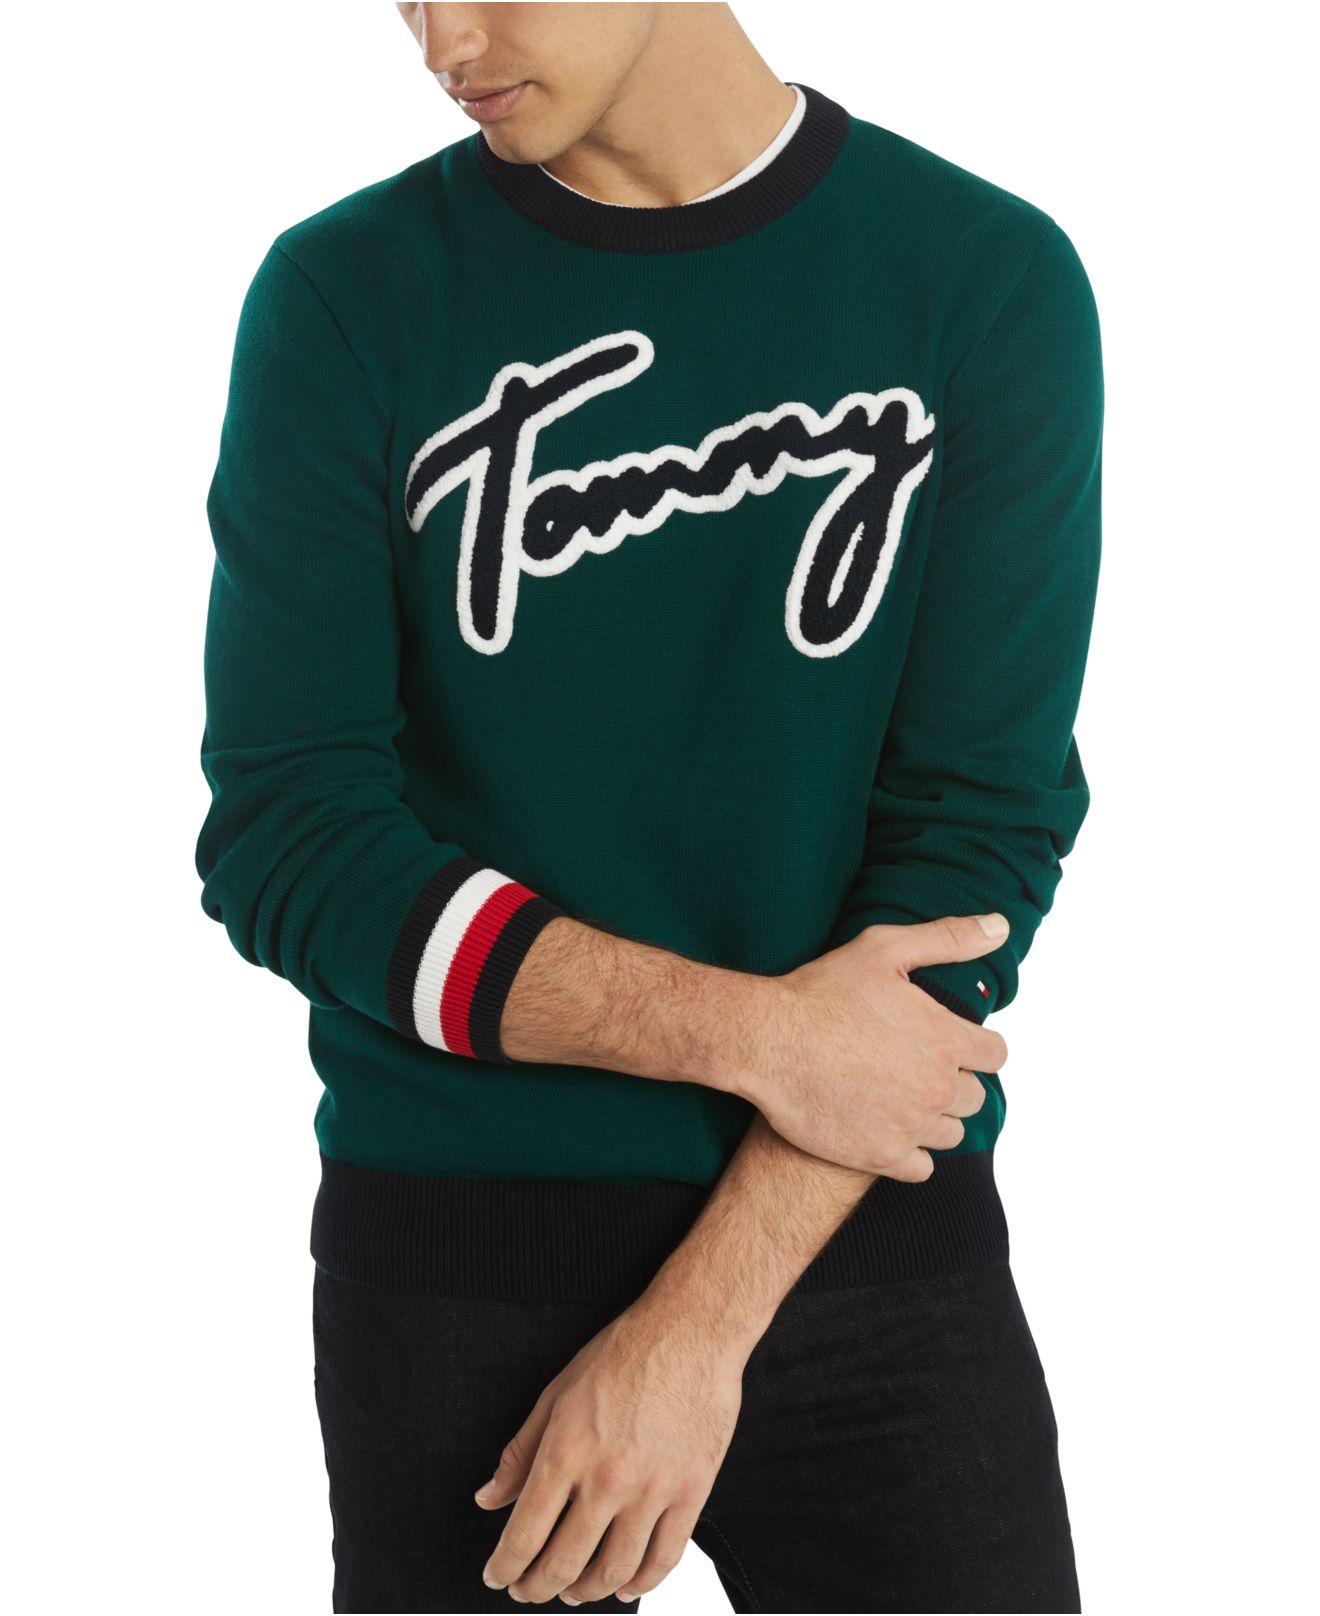 Tommy Hilfiger Cotton Lawson Logo Sweater in Green for Men - Lyst